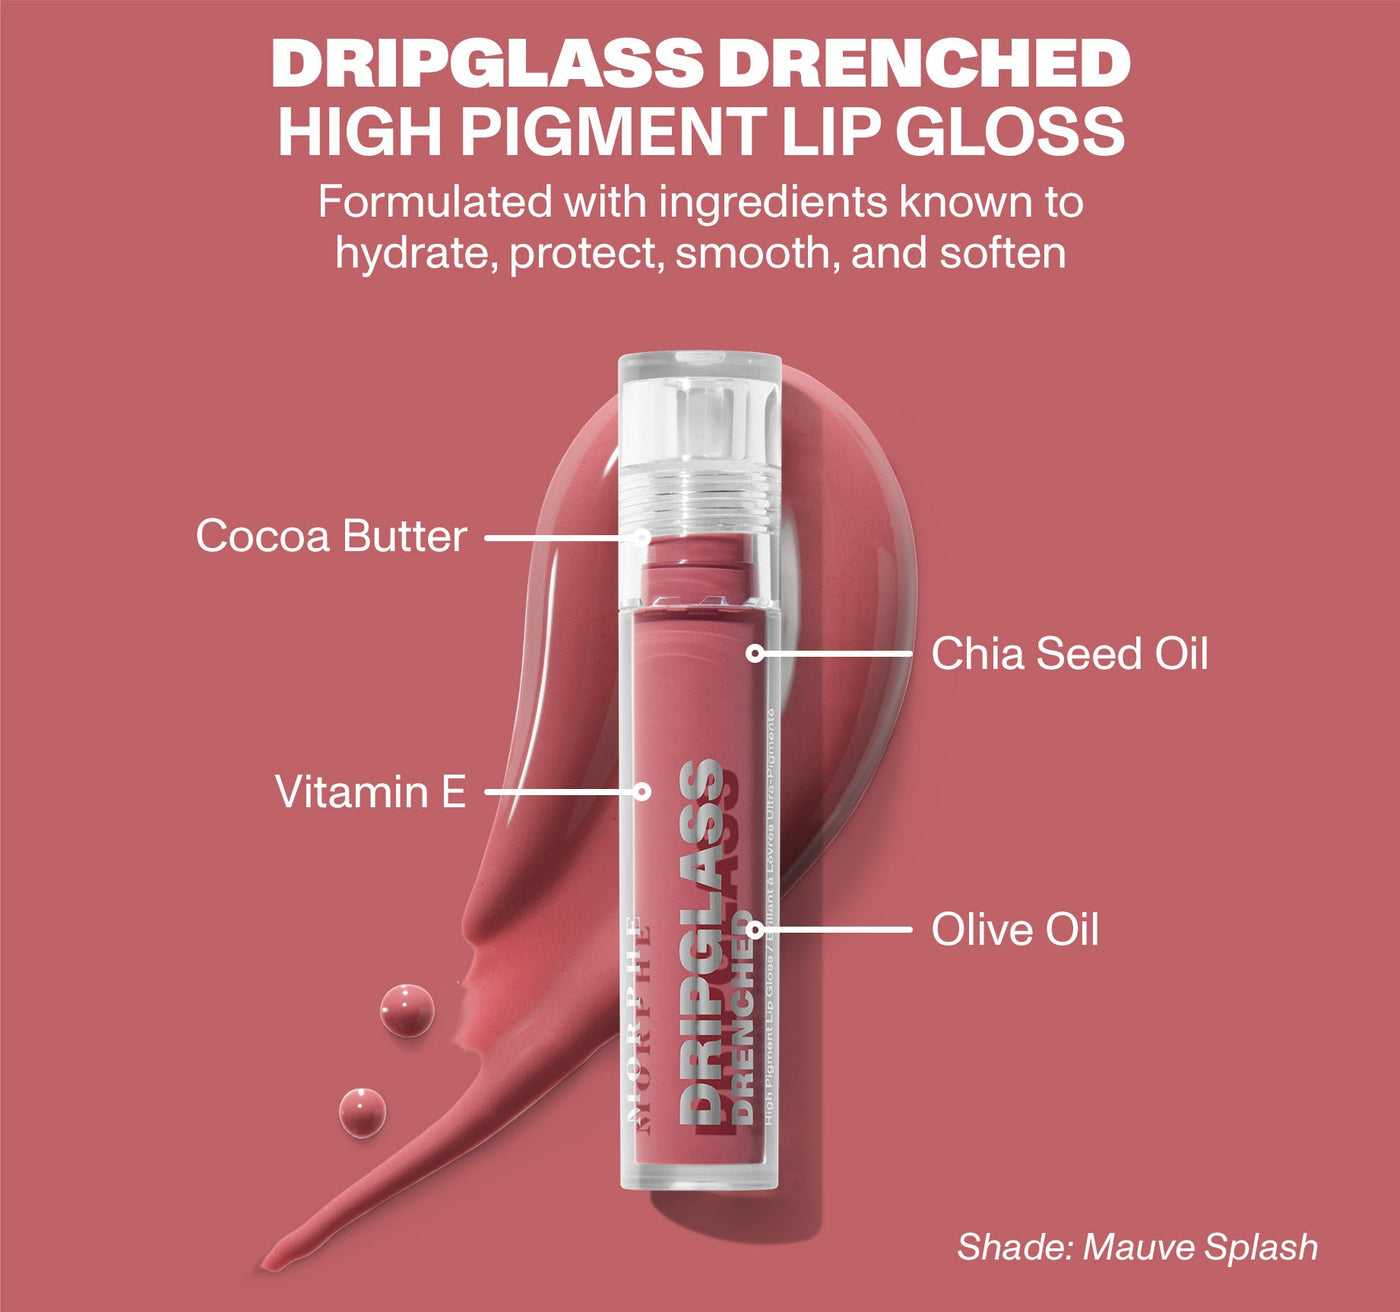 Dripglass Drenched High Pigment Lip Gloss - Naked Dip